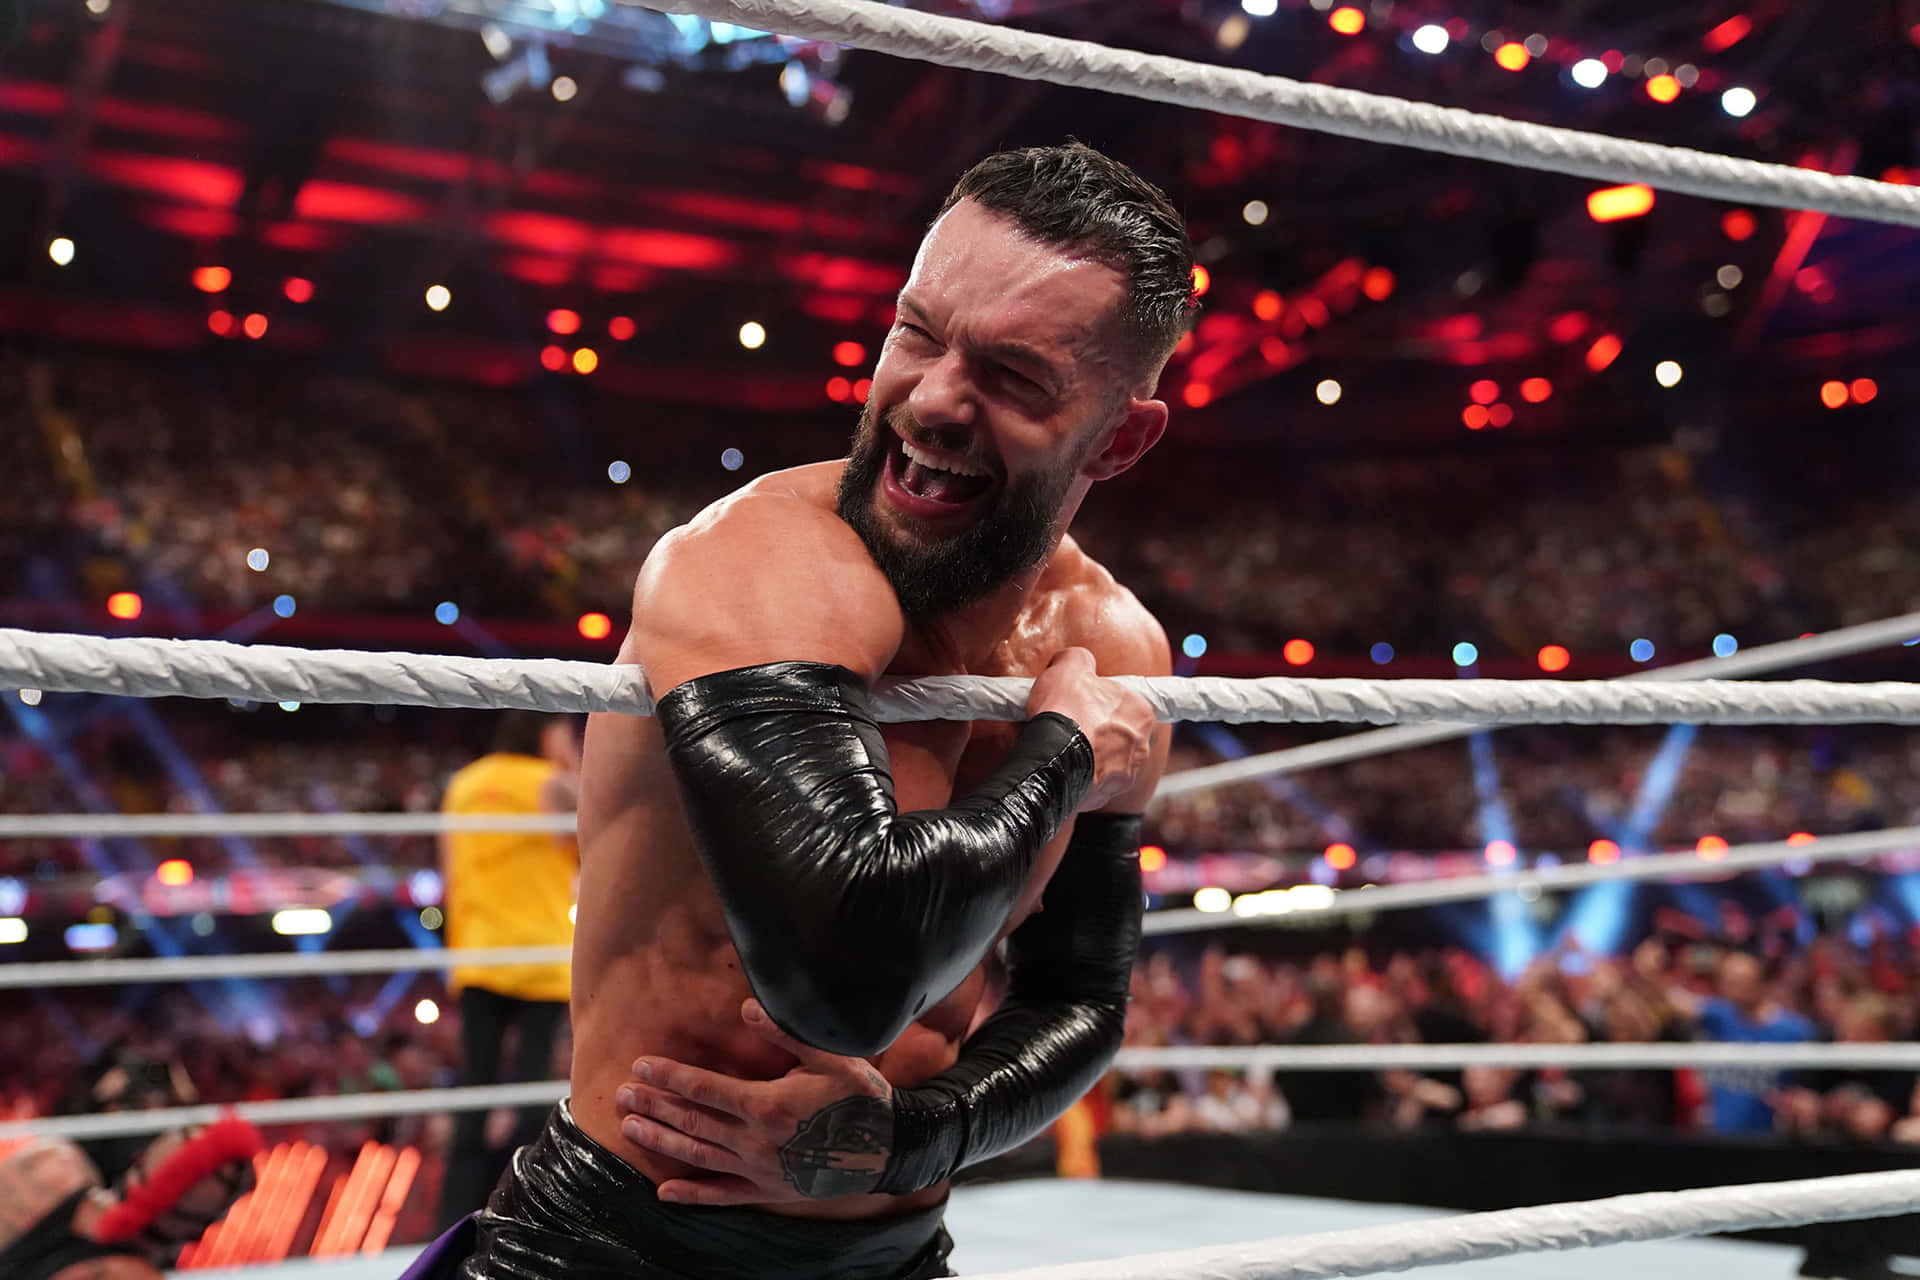 Strict perseverance personified, Fin Balor beams in this stellar wrestling shot. Wallpaper